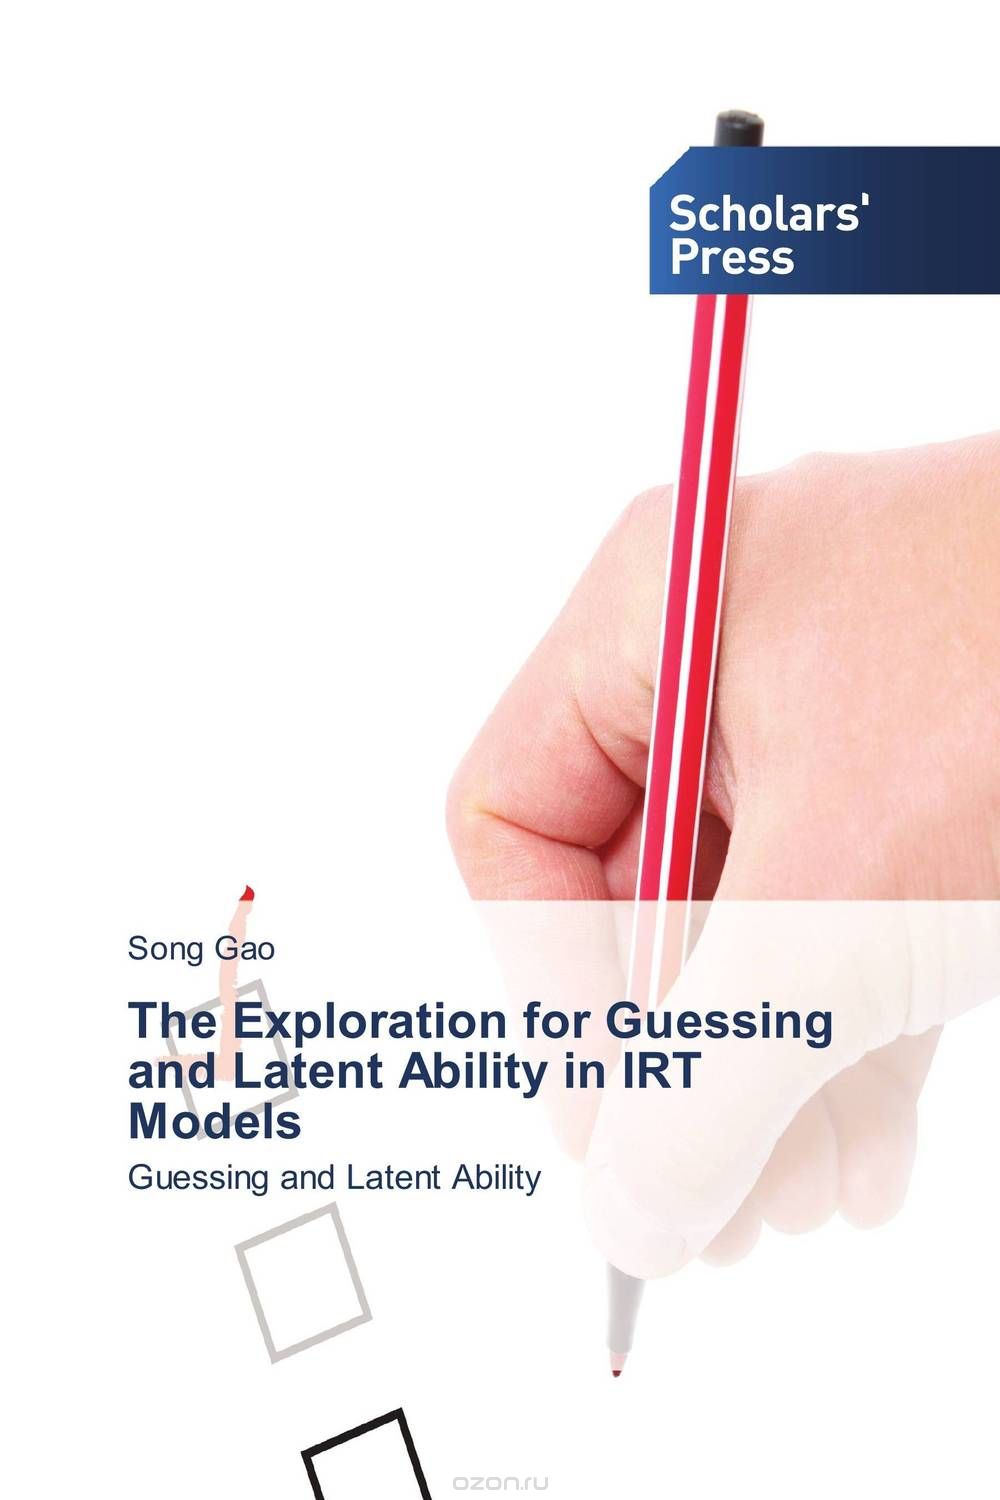 The Exploration for Guessing and Latent Ability in IRT Models